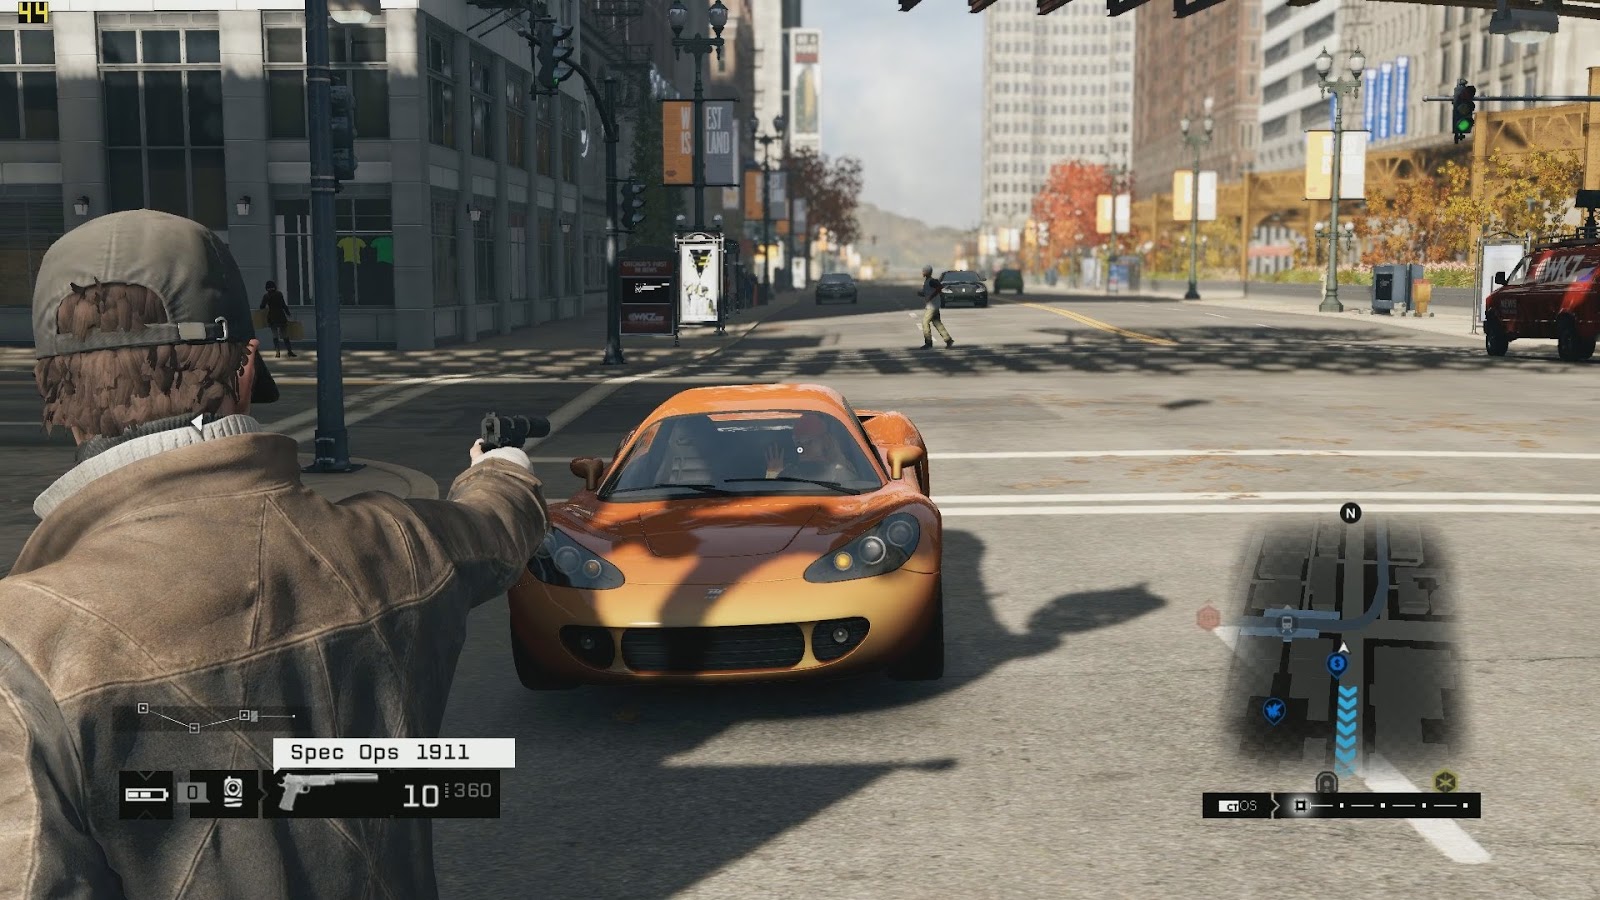 Bristolian Gamer Watch Dogs Review Not As Bad As People Make It Out To Be